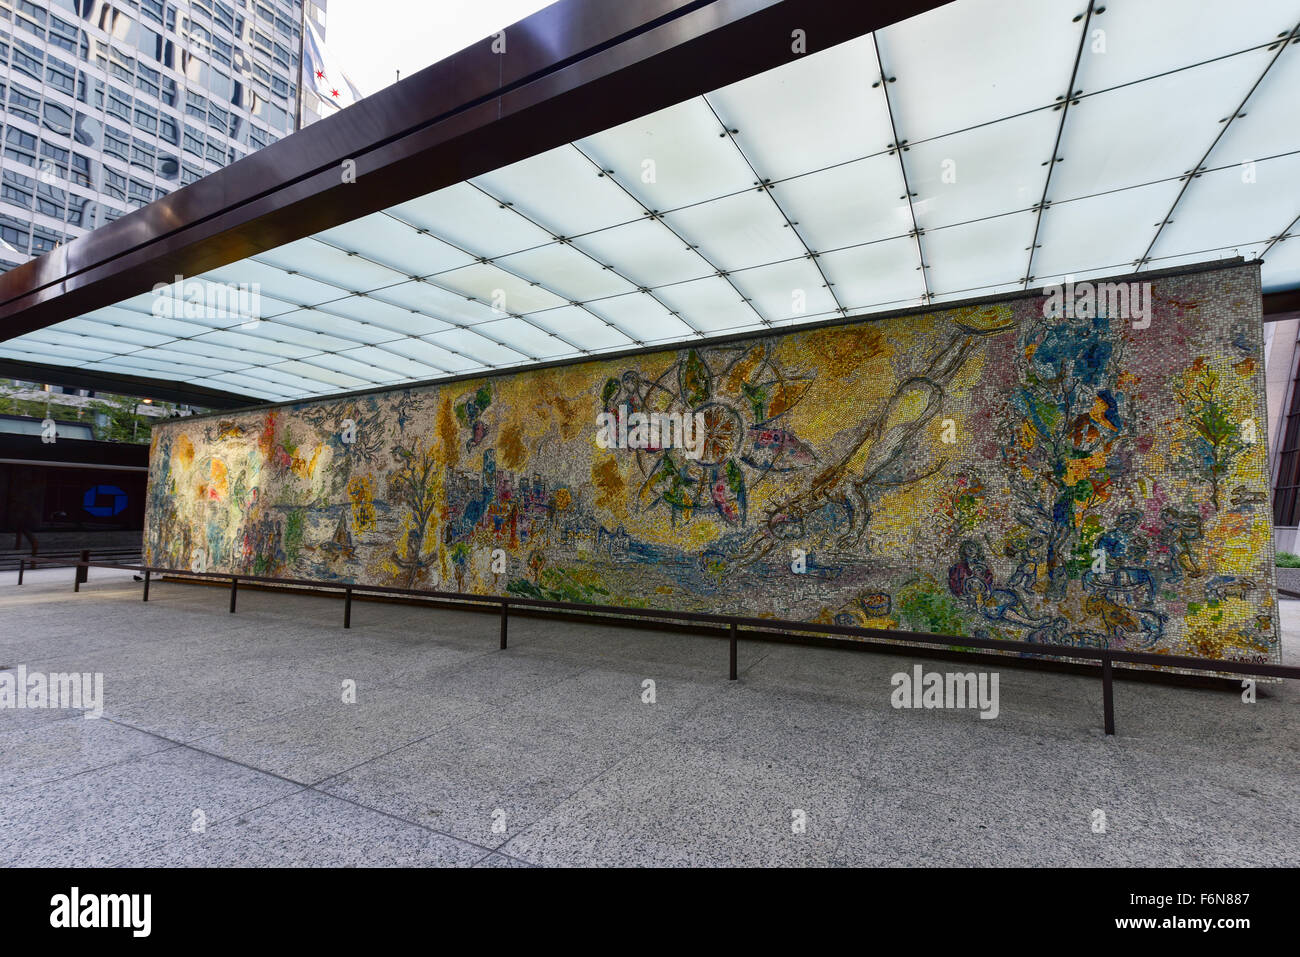 Chicago - September 6, 2015: Four Seasons is a mosaic by Marc Chagall that is located in Chase Tower Plaza in the Loop district Stock Photo